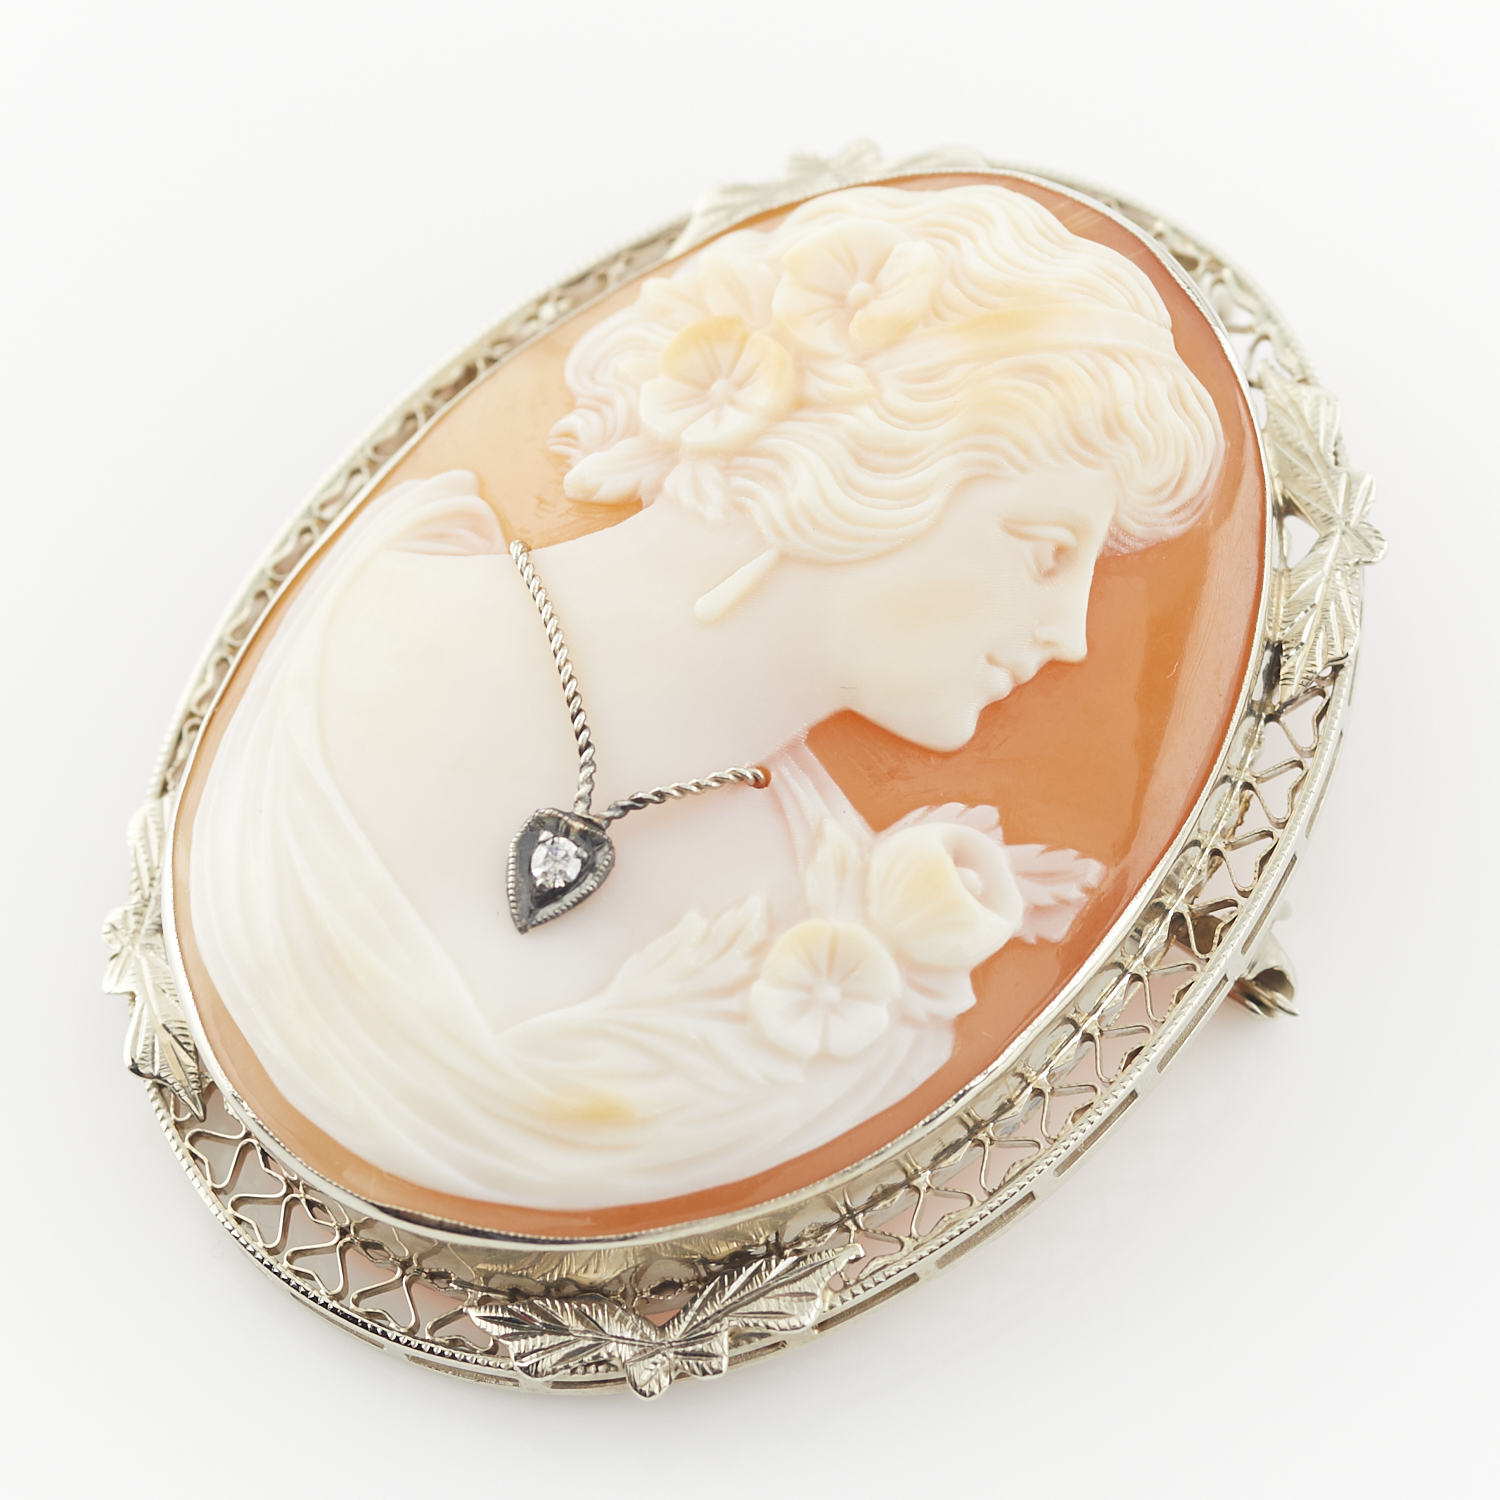 14k White Gold Cameo Habille Brooch with Diamond - Image 2 of 7